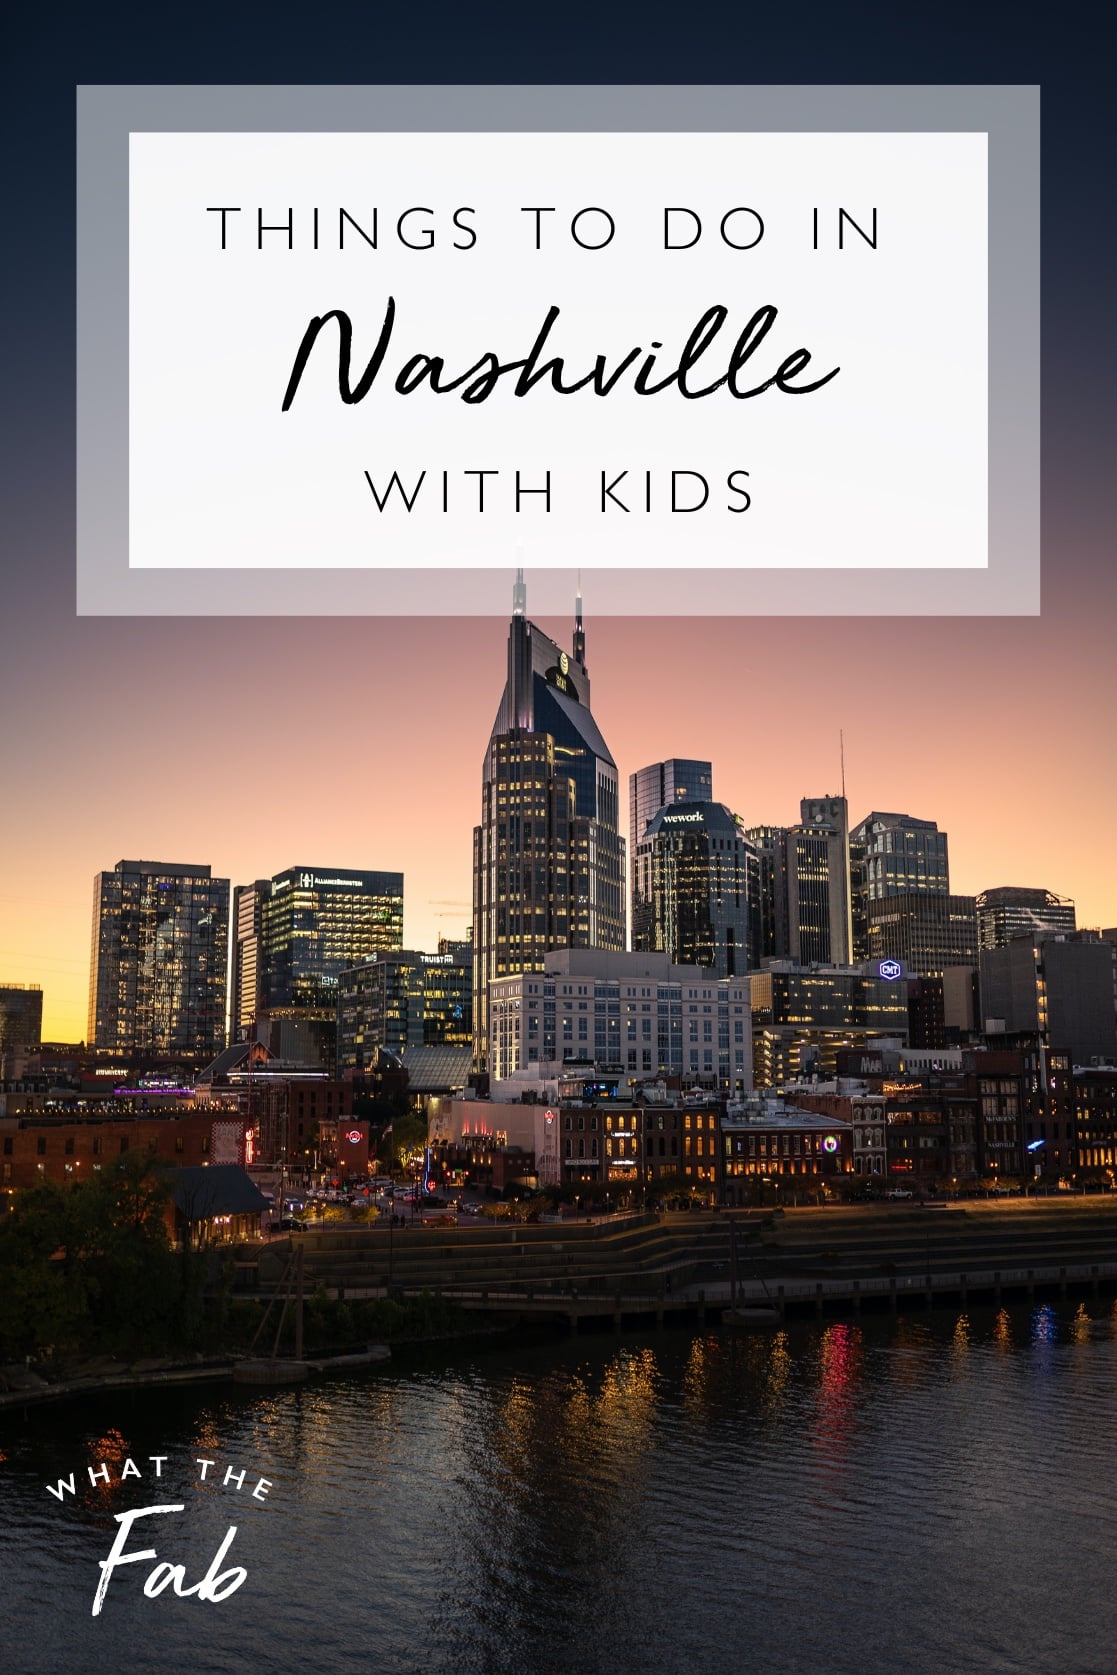 15 Things to Do in Nashville with Kids by travel blogger What The Fab